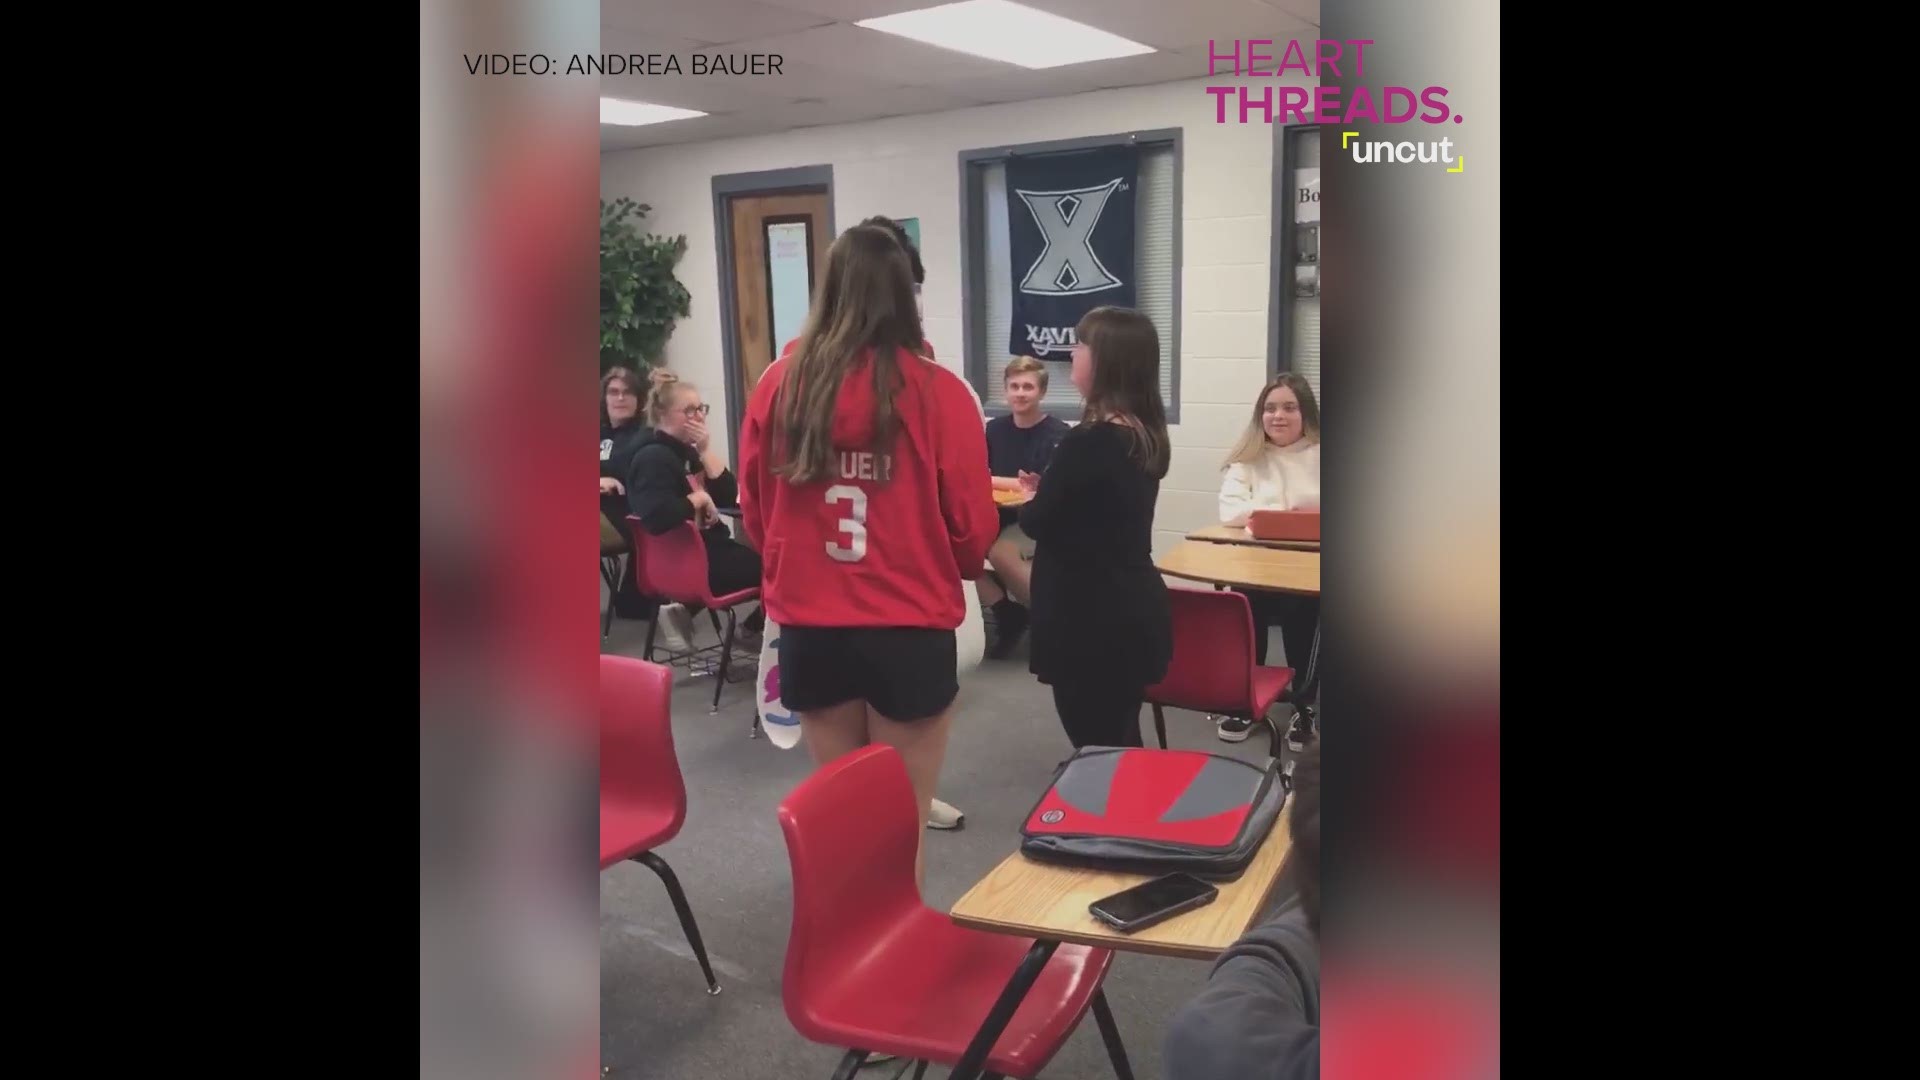 Katie Smith planned a special promposal surprise for her friend Payton Bauer.